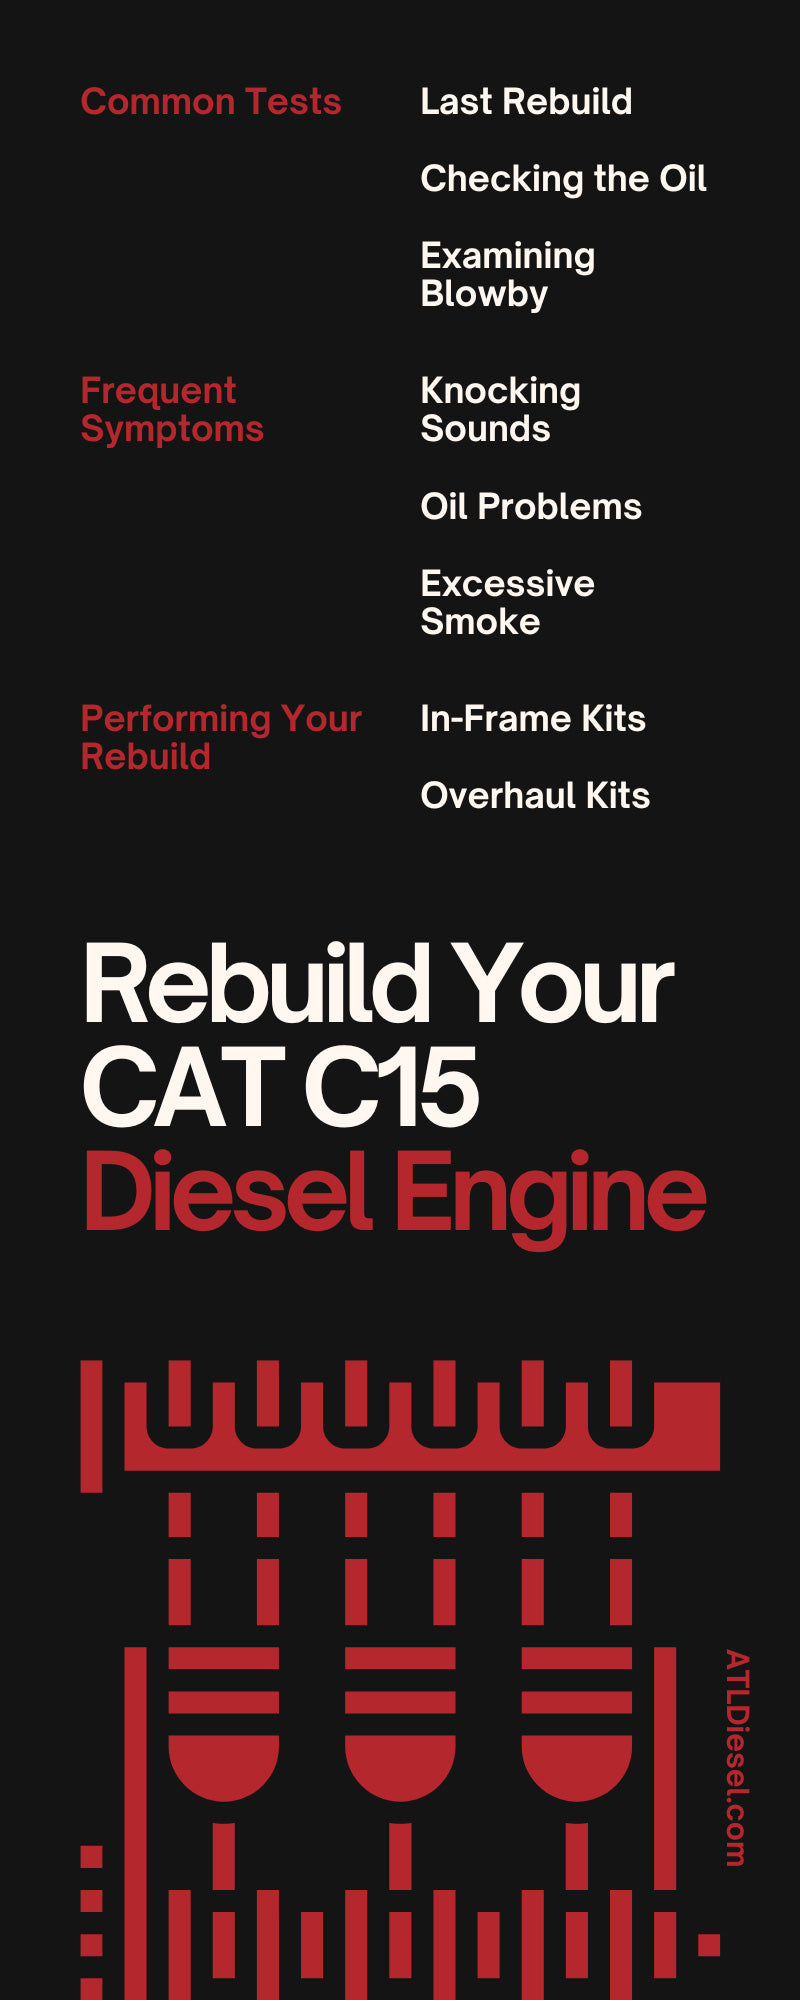 How To Know When To Rebuild Your CAT C15 Diesel Engine